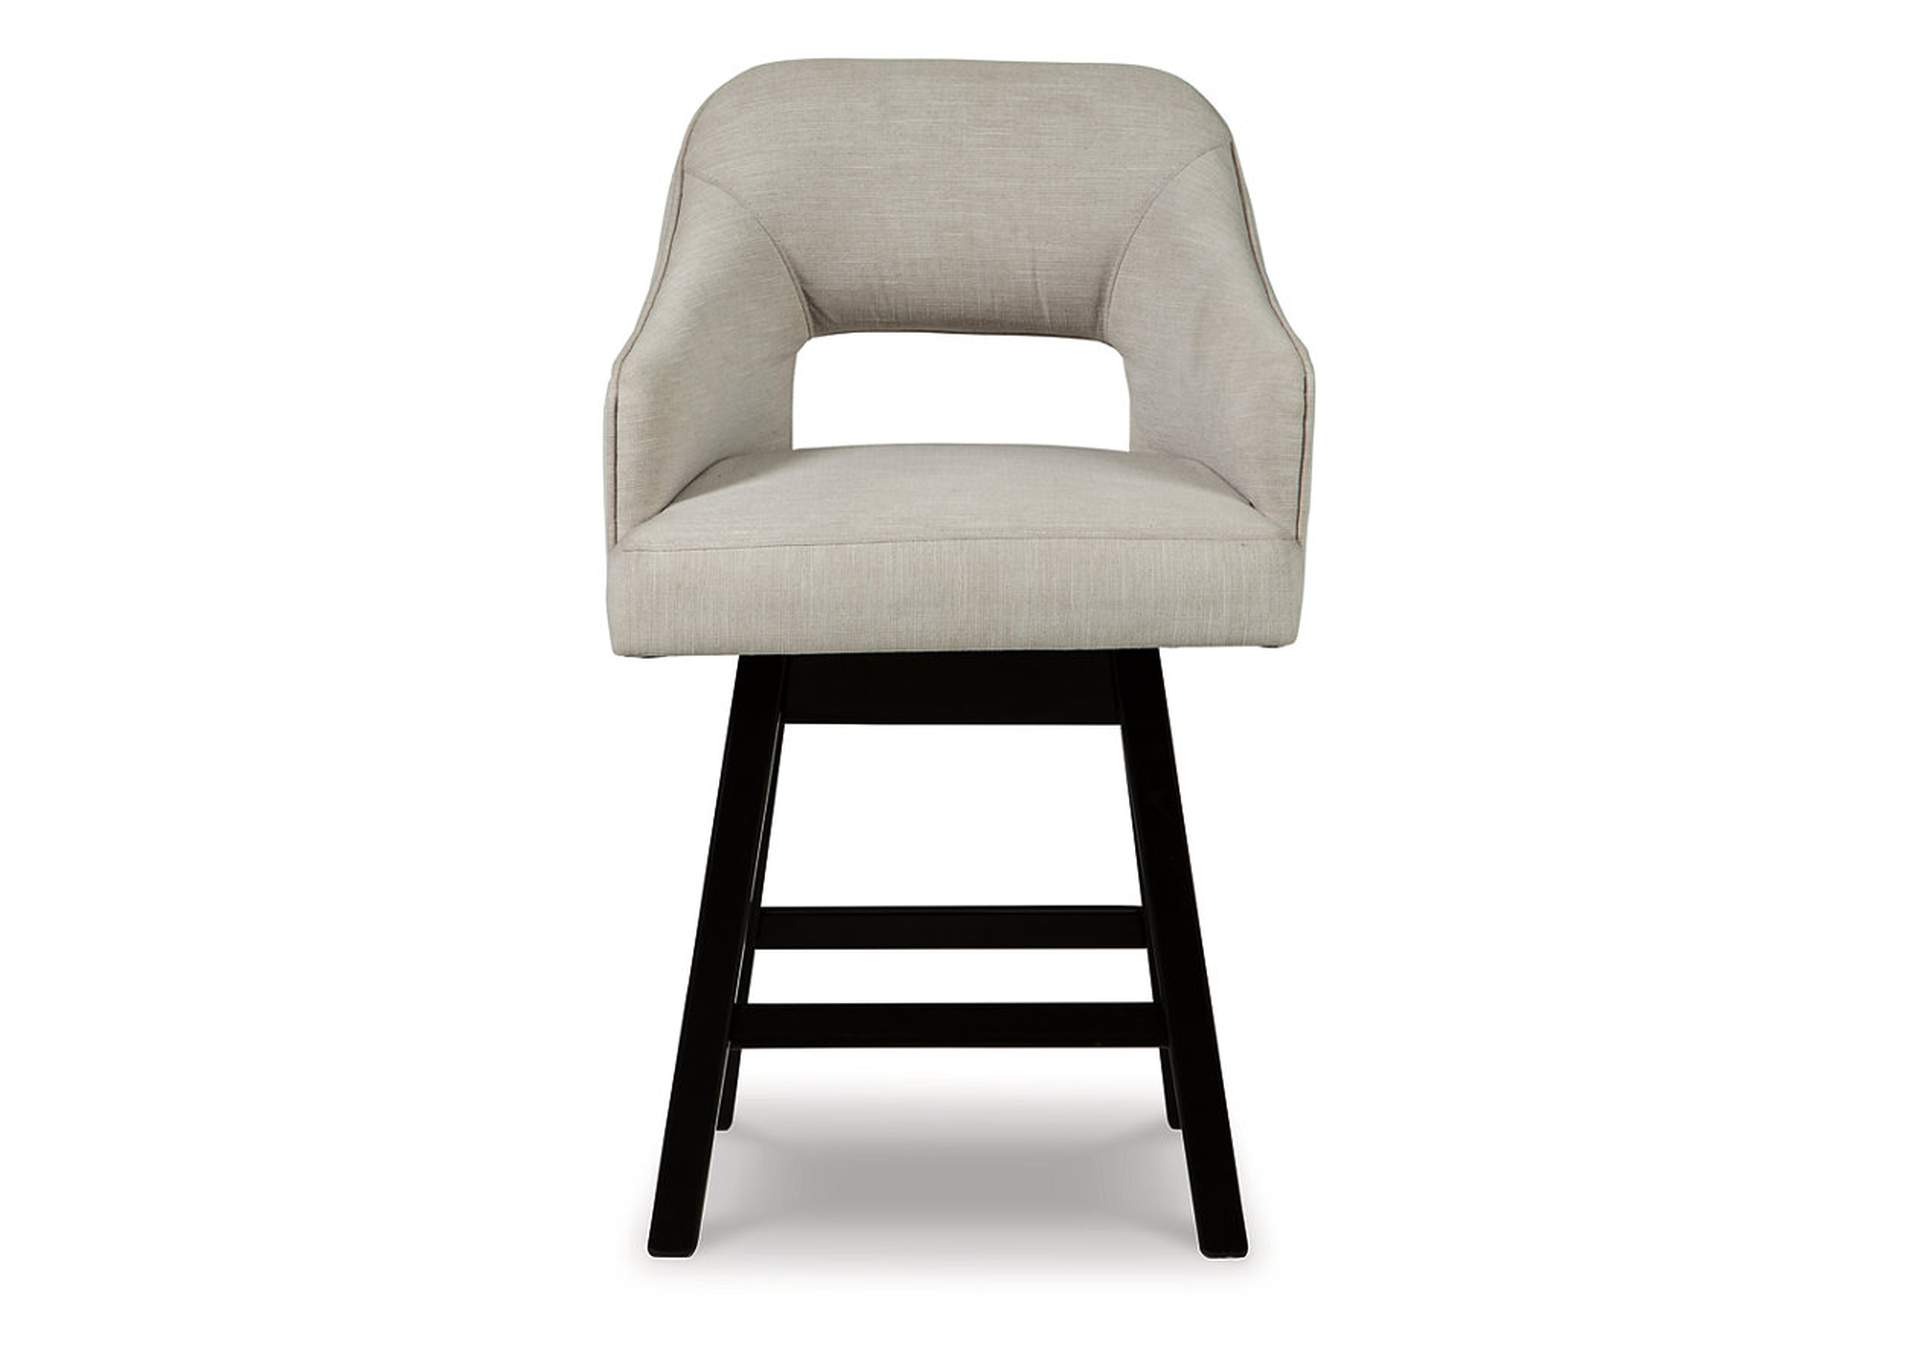 Tallenger Counter Height Bar Stool,Signature Design By Ashley